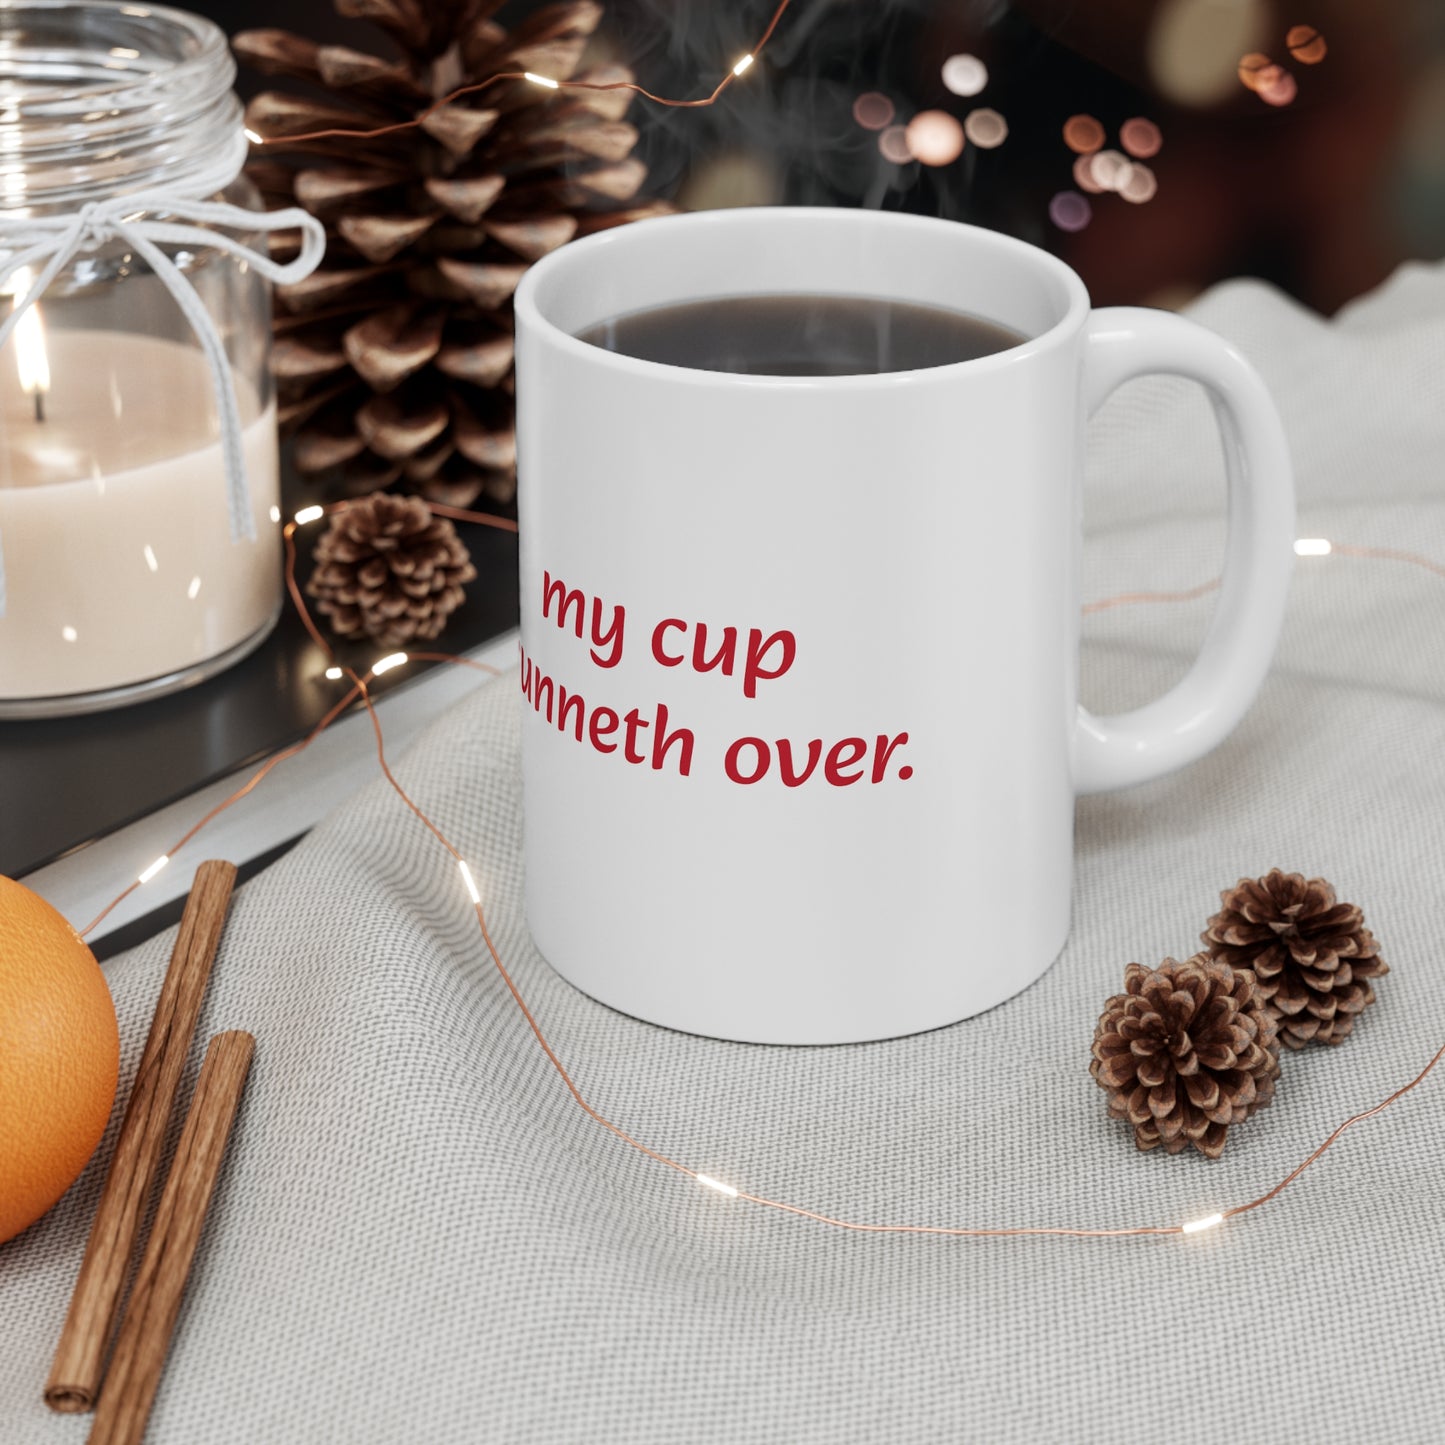 My cup runneth over - Inspirational Ceramic Mug 11oz - Red writing